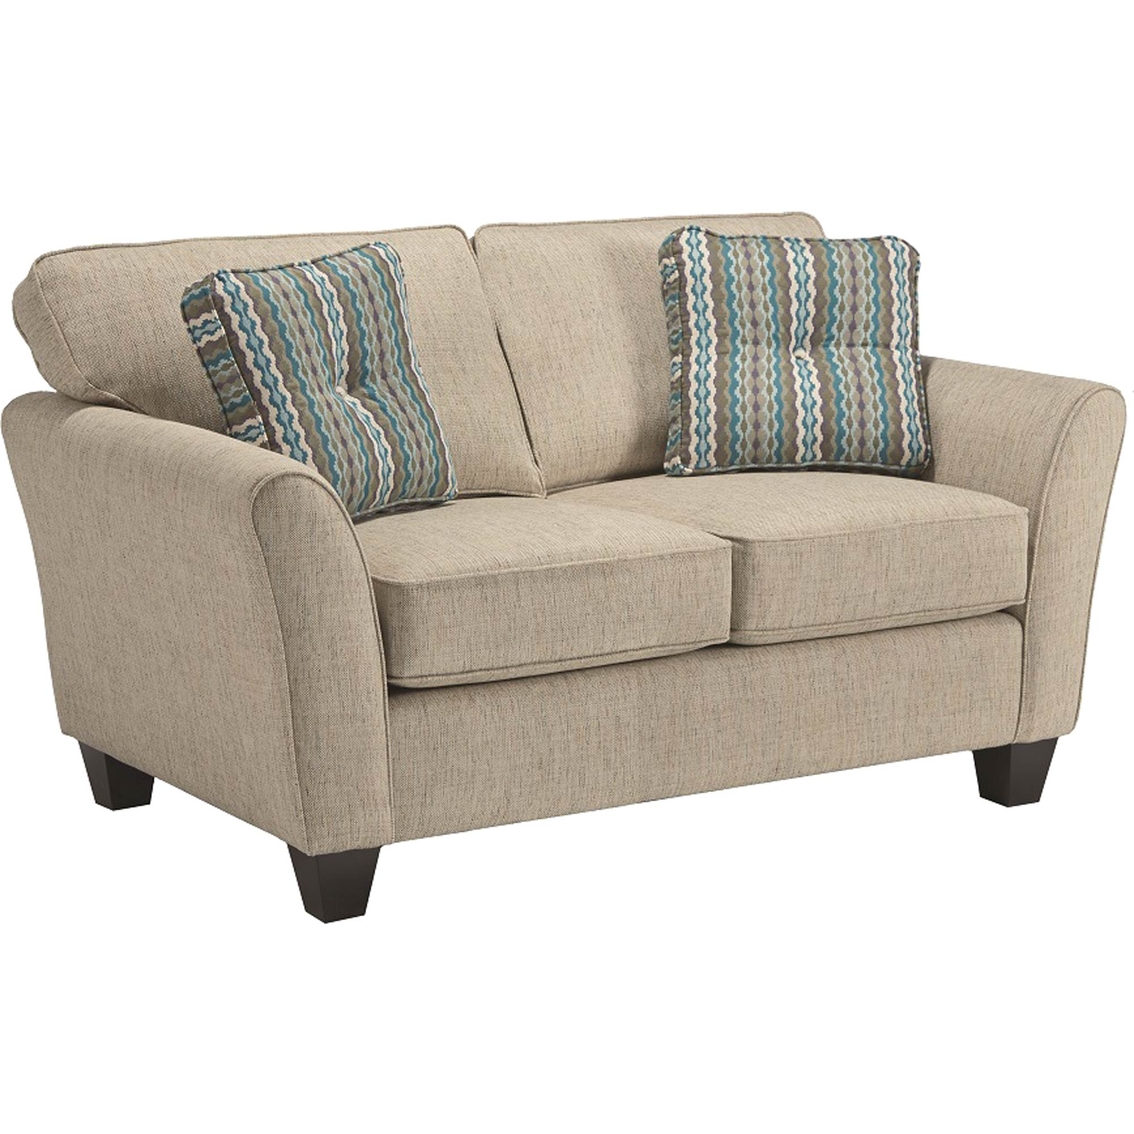 Broyhill Maddie Loveseat Sofas And Couches Furniture And Appliances